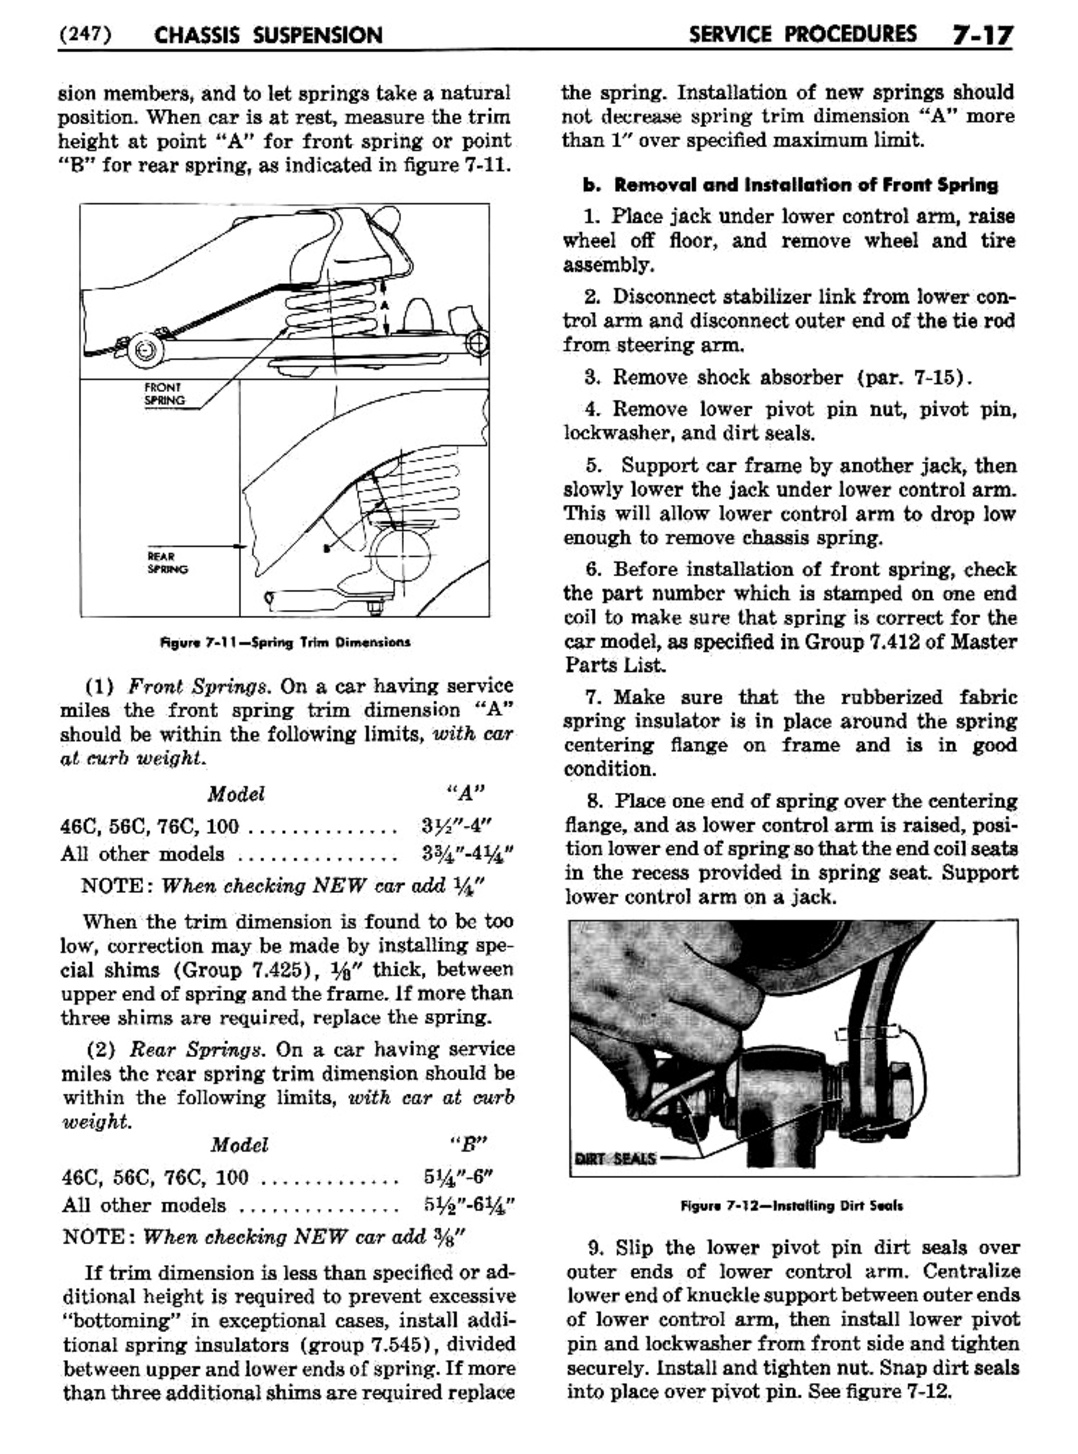 n_08 1954 Buick Shop Manual - Chassis Suspension-017-017.jpg